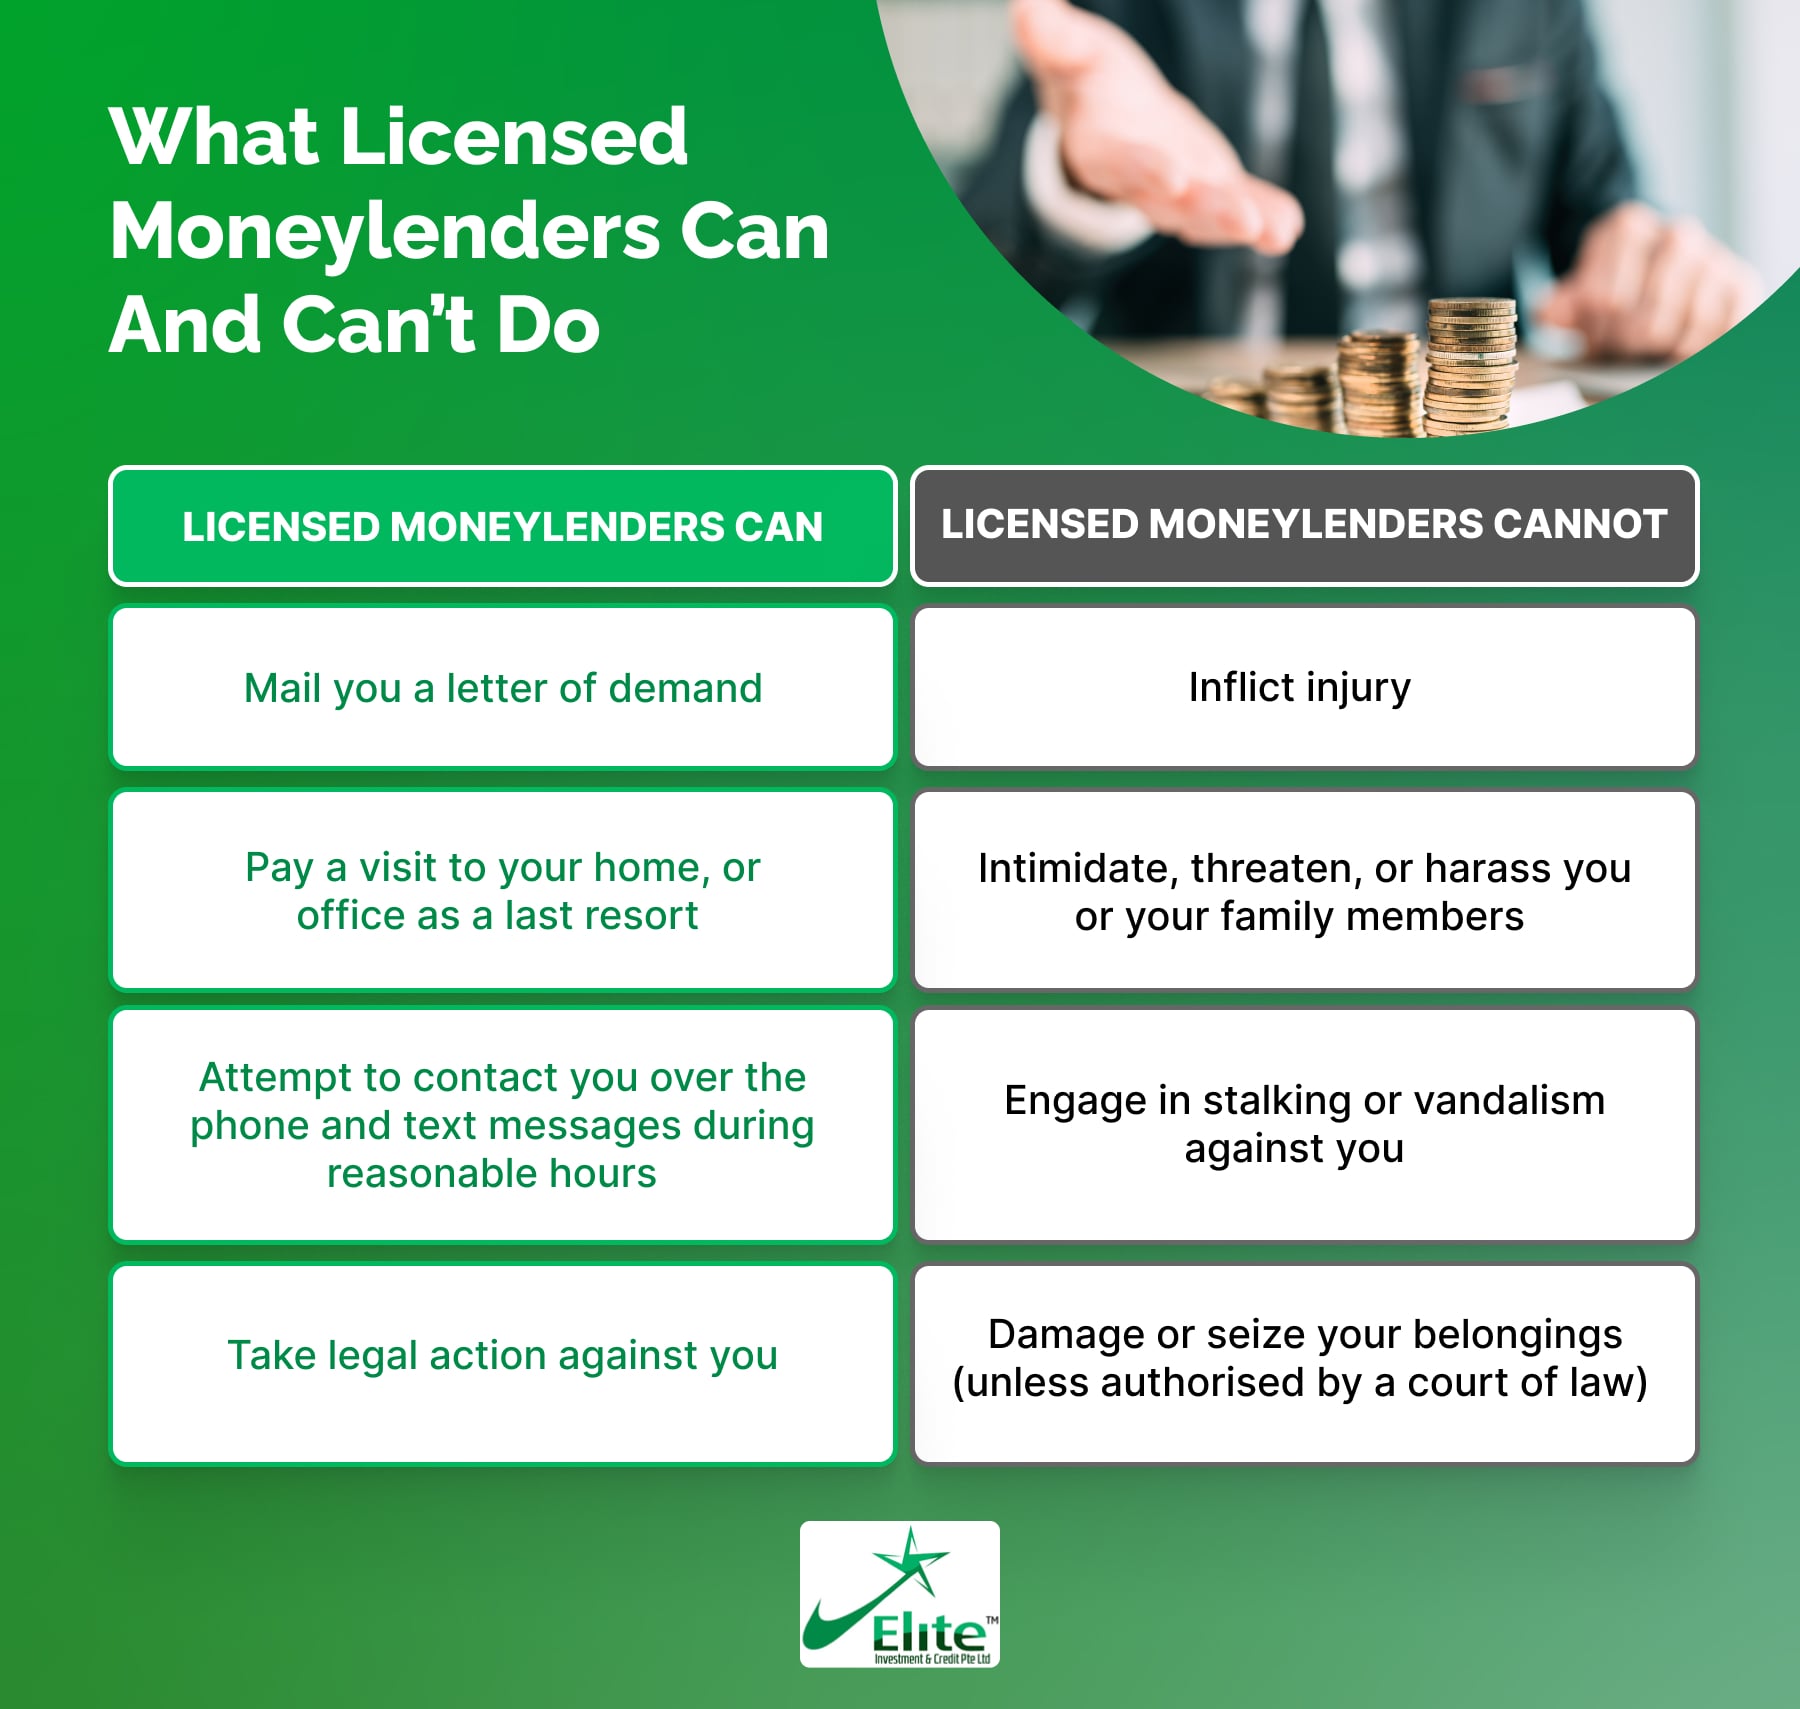 What licensed moneylenders can and can’t do